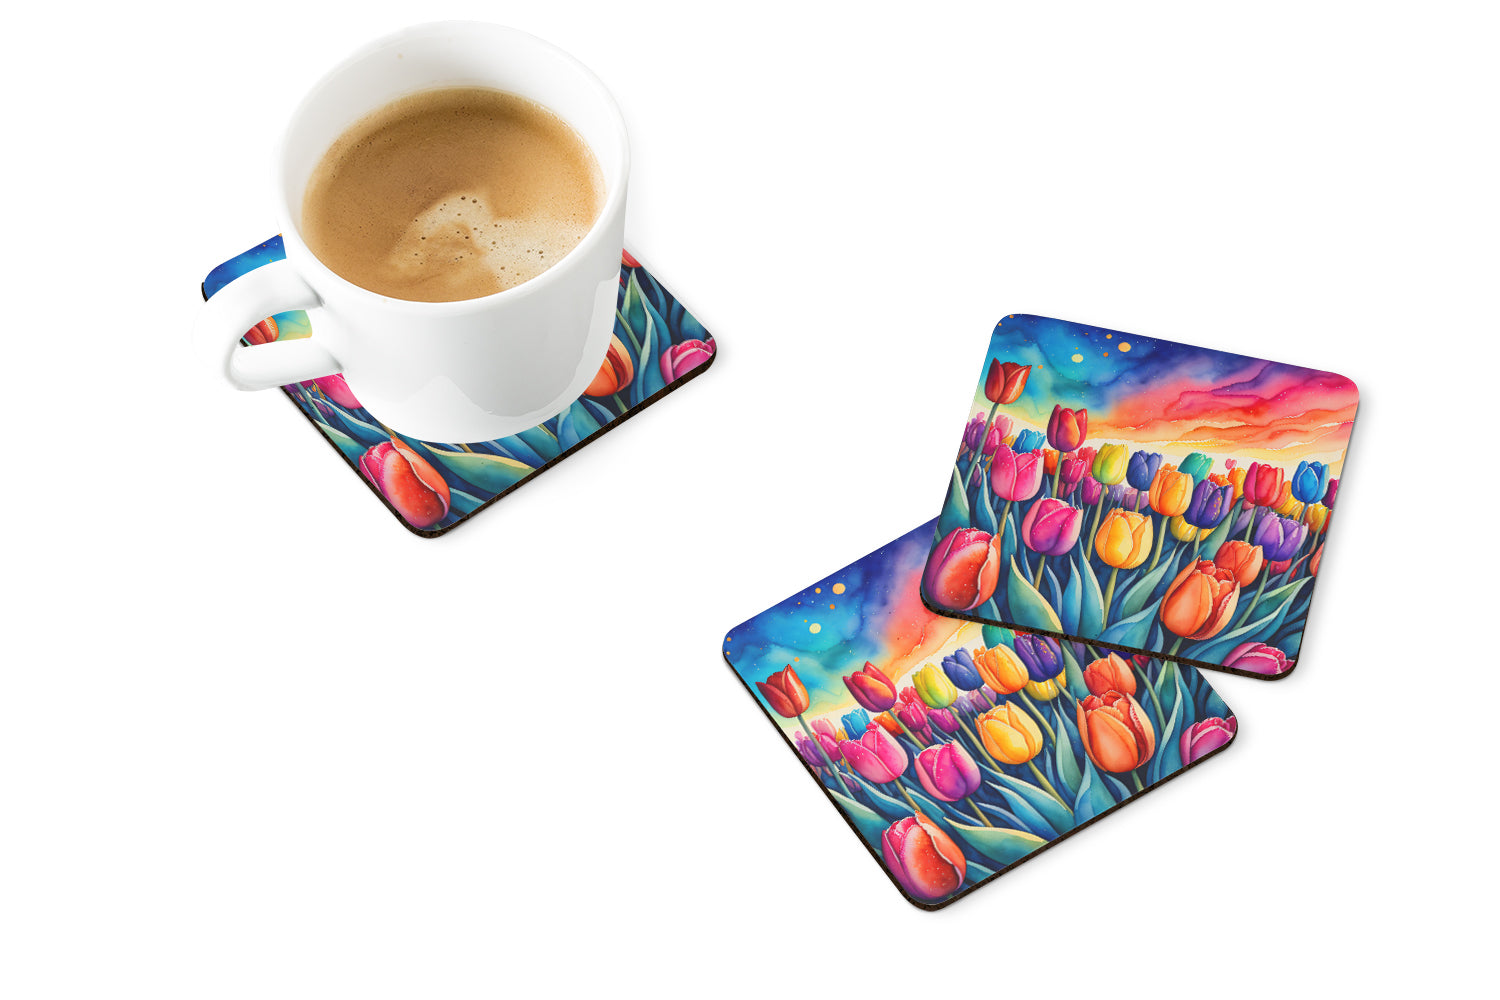 Buy this Colorful Tulips Foam Coaster Set of 4